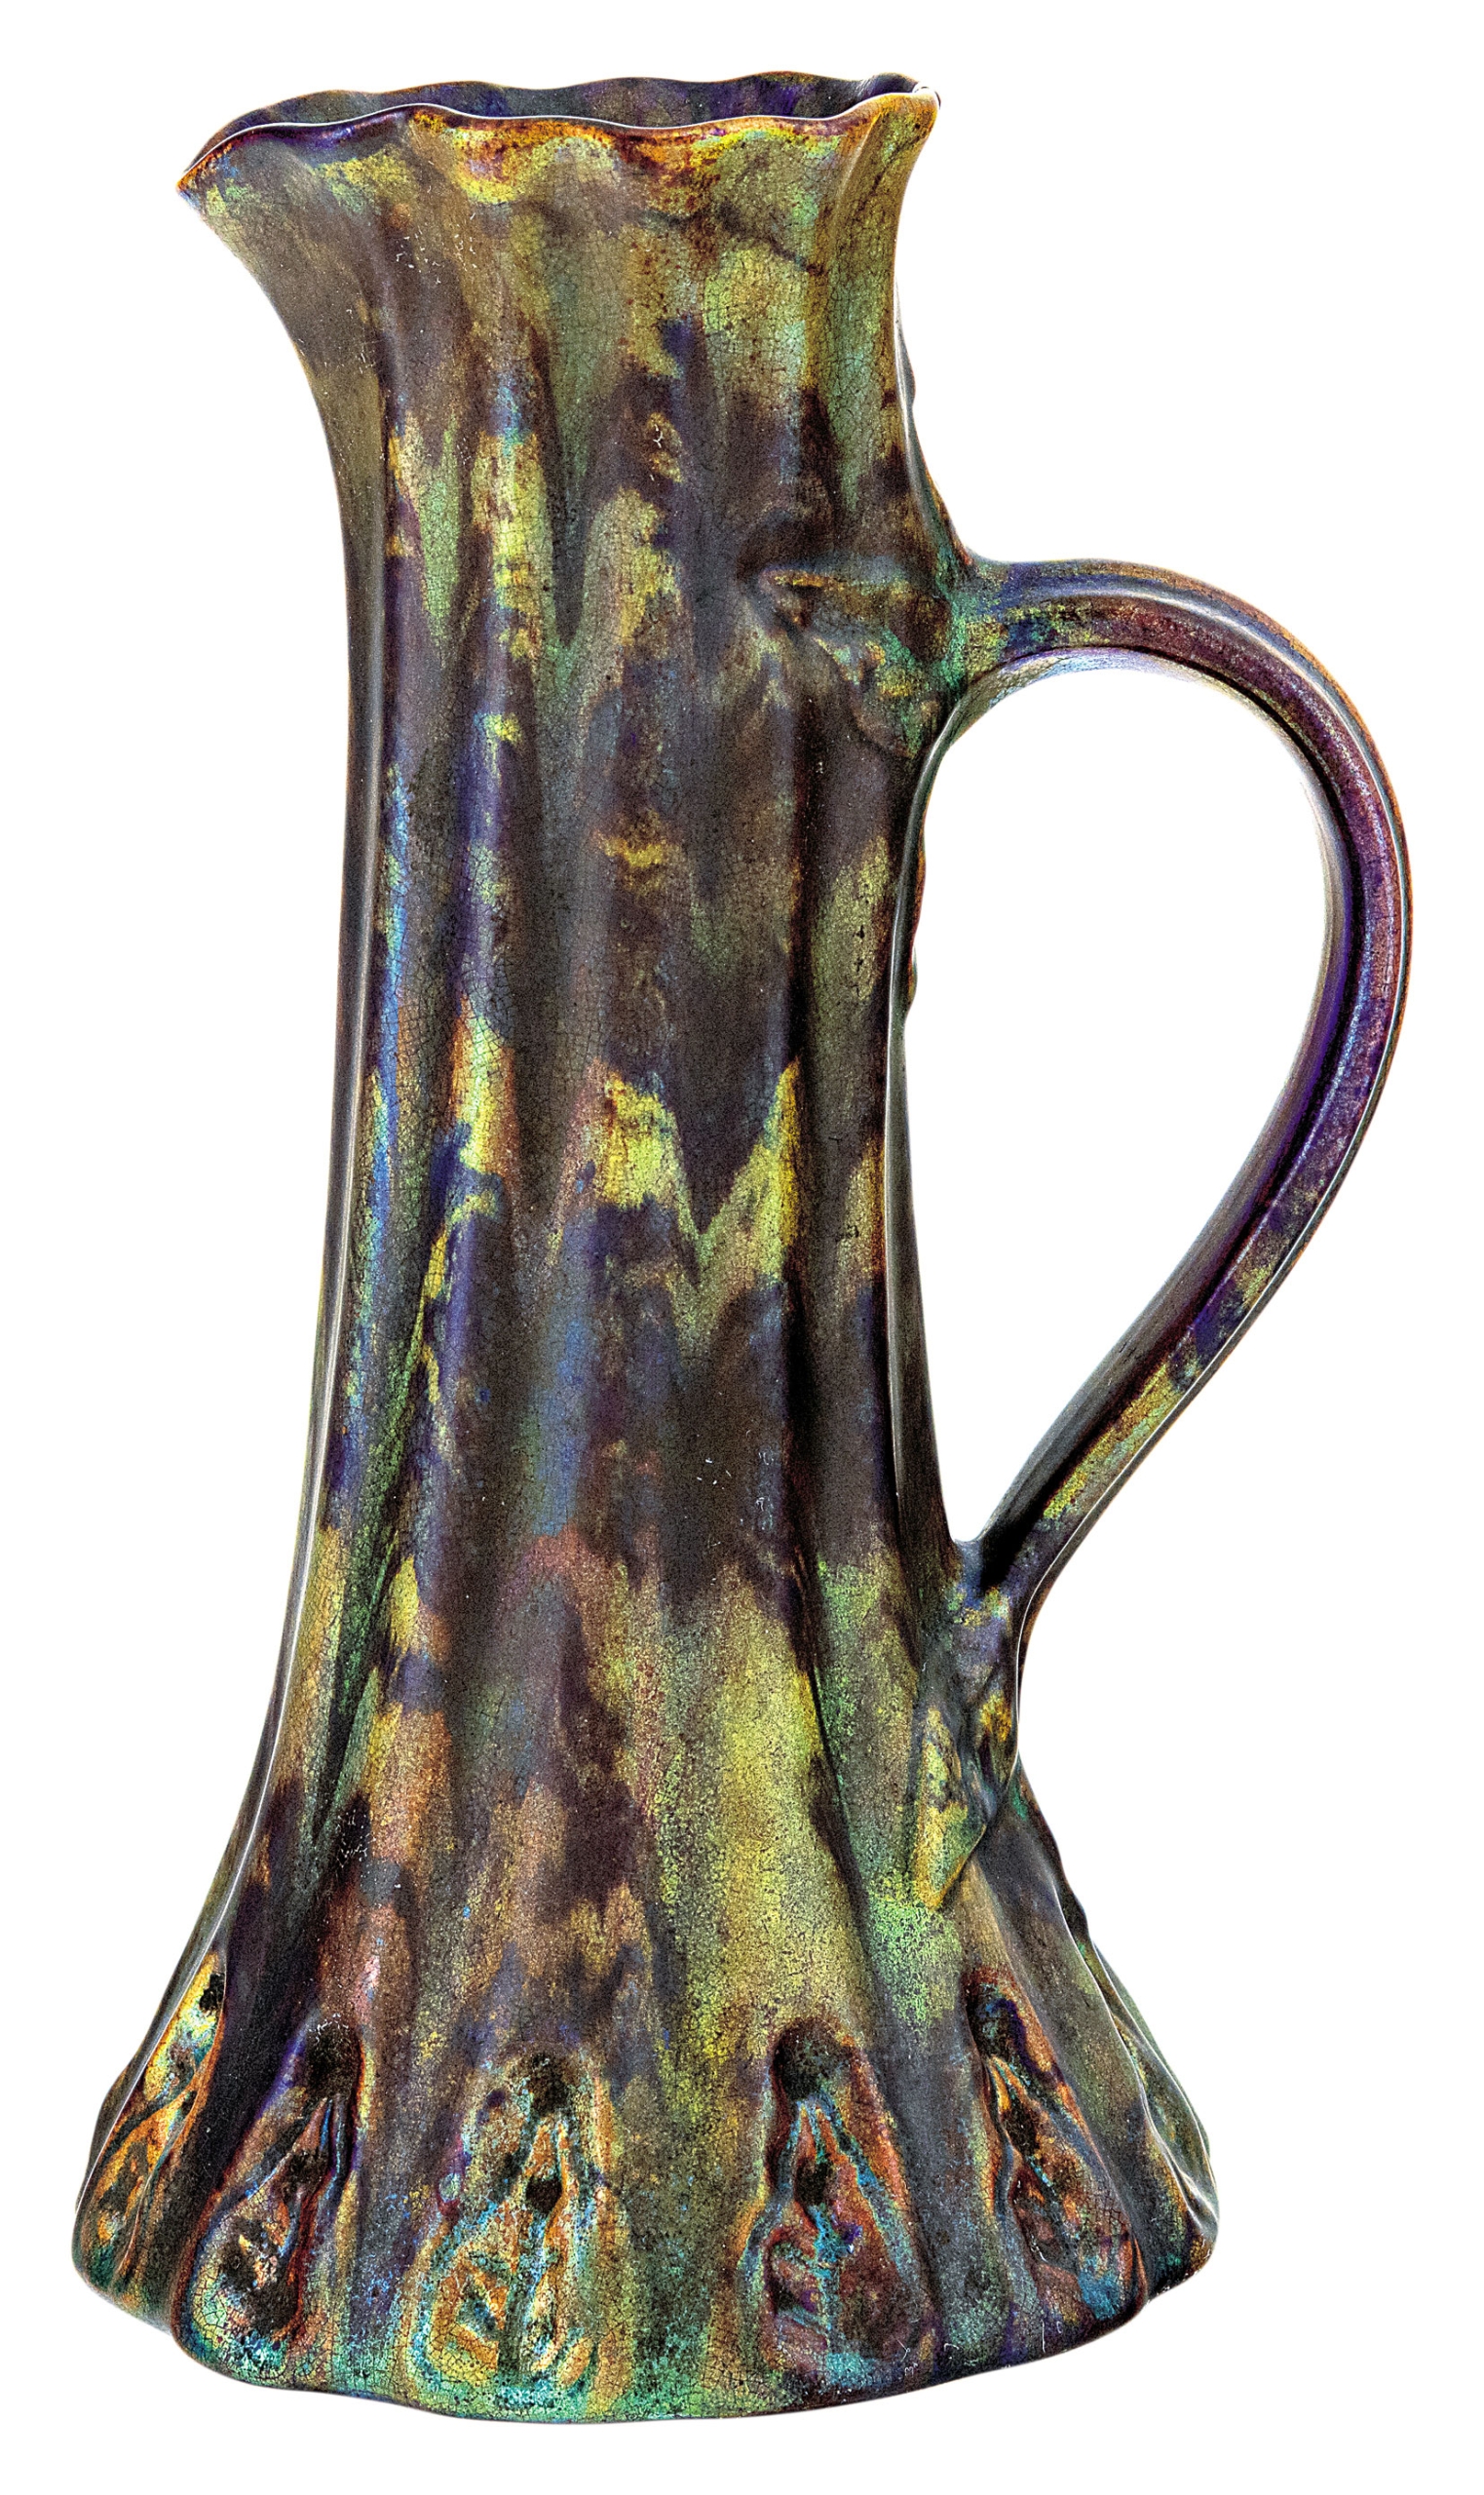 Zsolnay Ribbed Jug decorated with Leafs, 1899